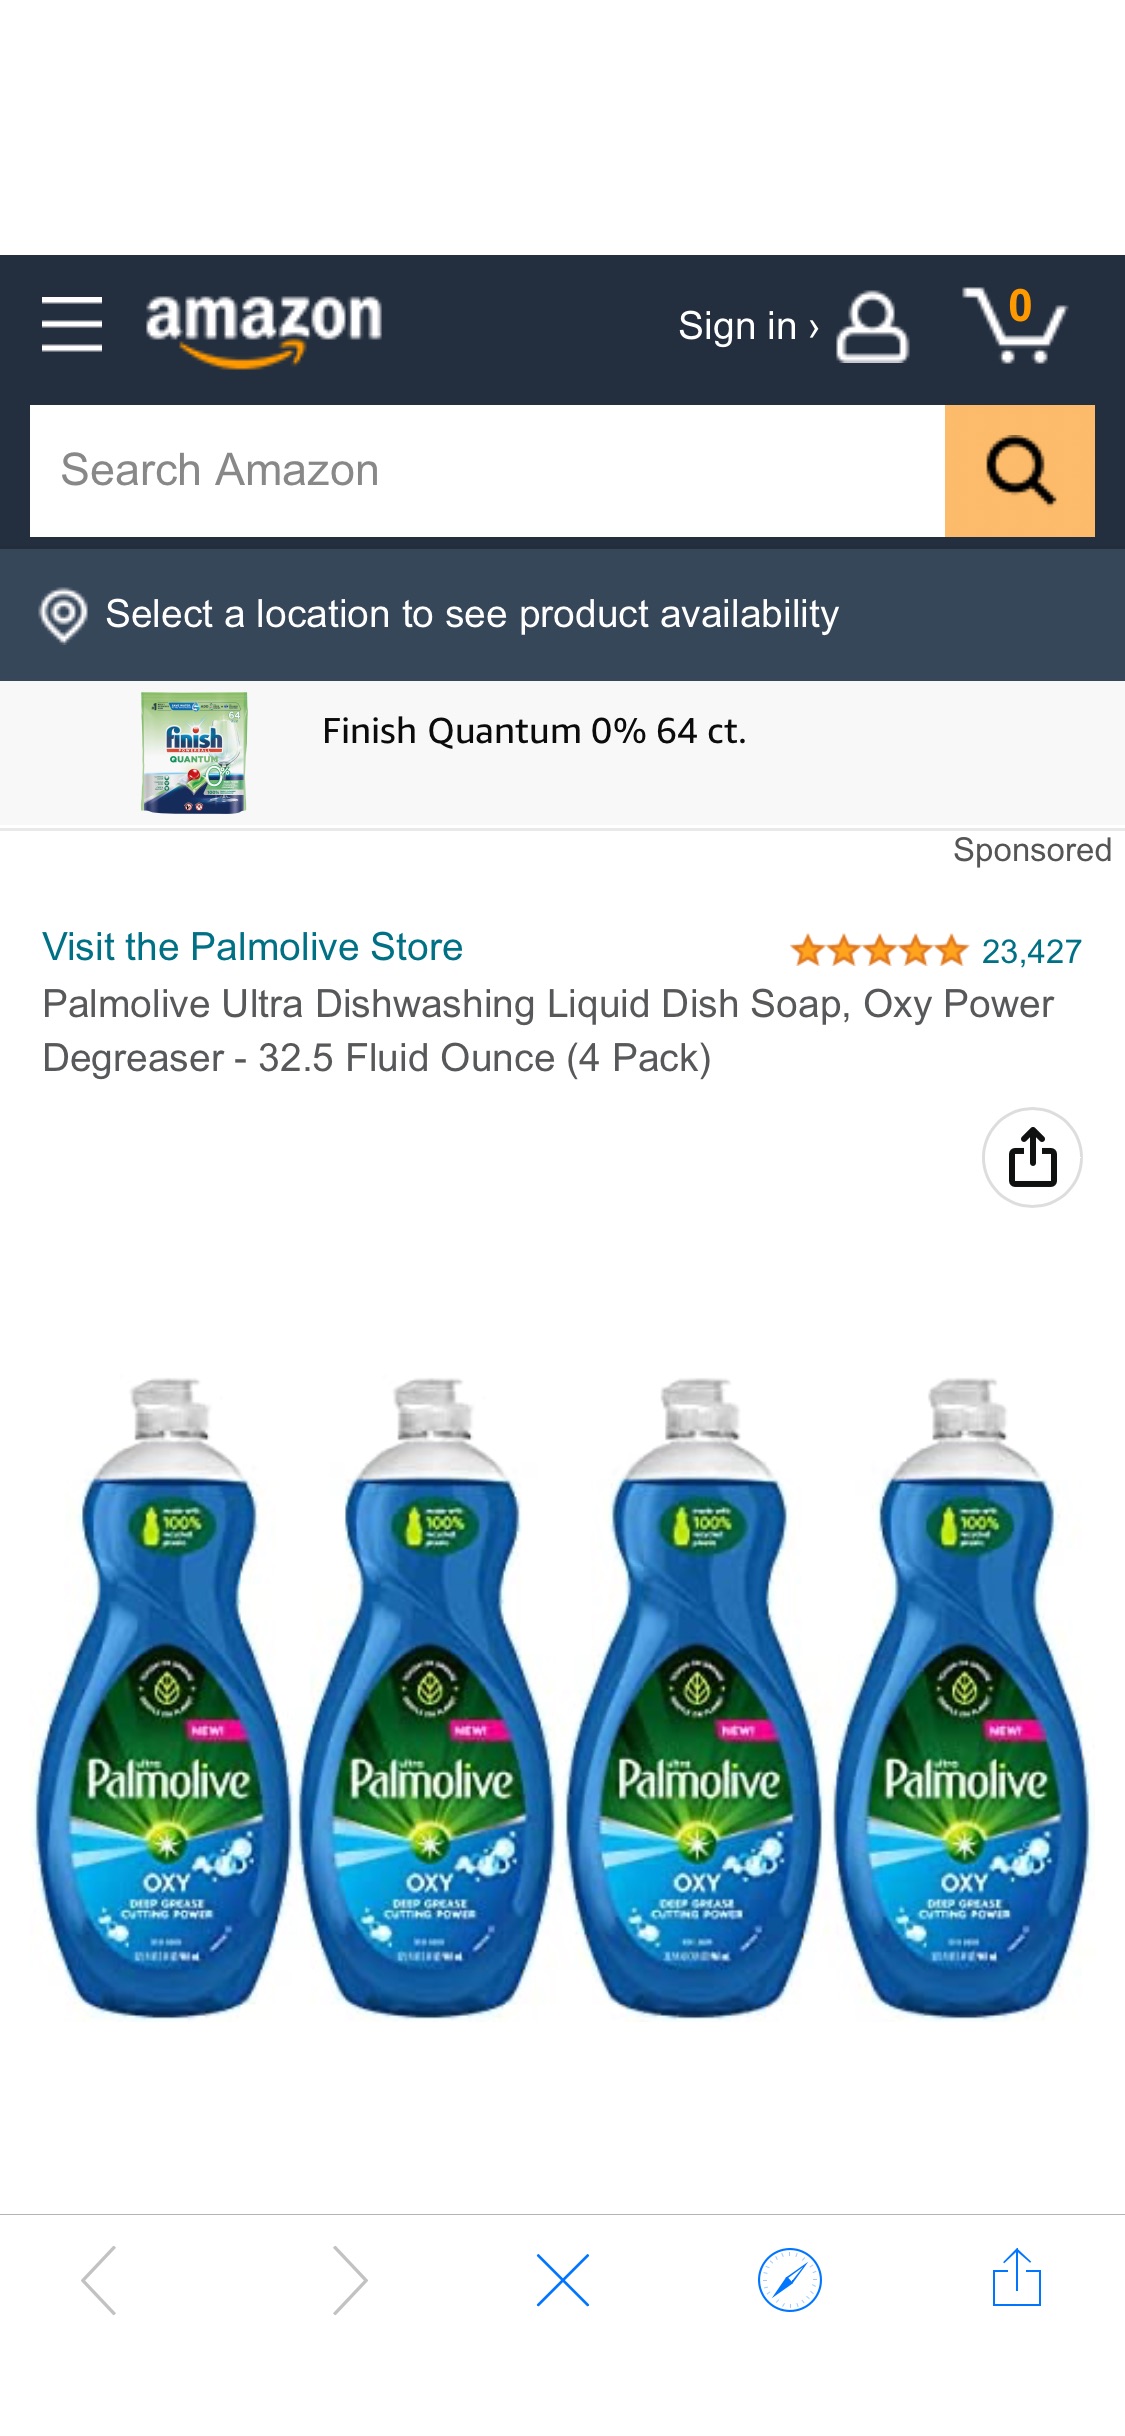 Amazon.com: Palmolive Ultra Dishwashing Liquid Dish Soap, Oxy Power Degreaser - 32.5 Fluid Ounce (4 Pack) : Health & Household